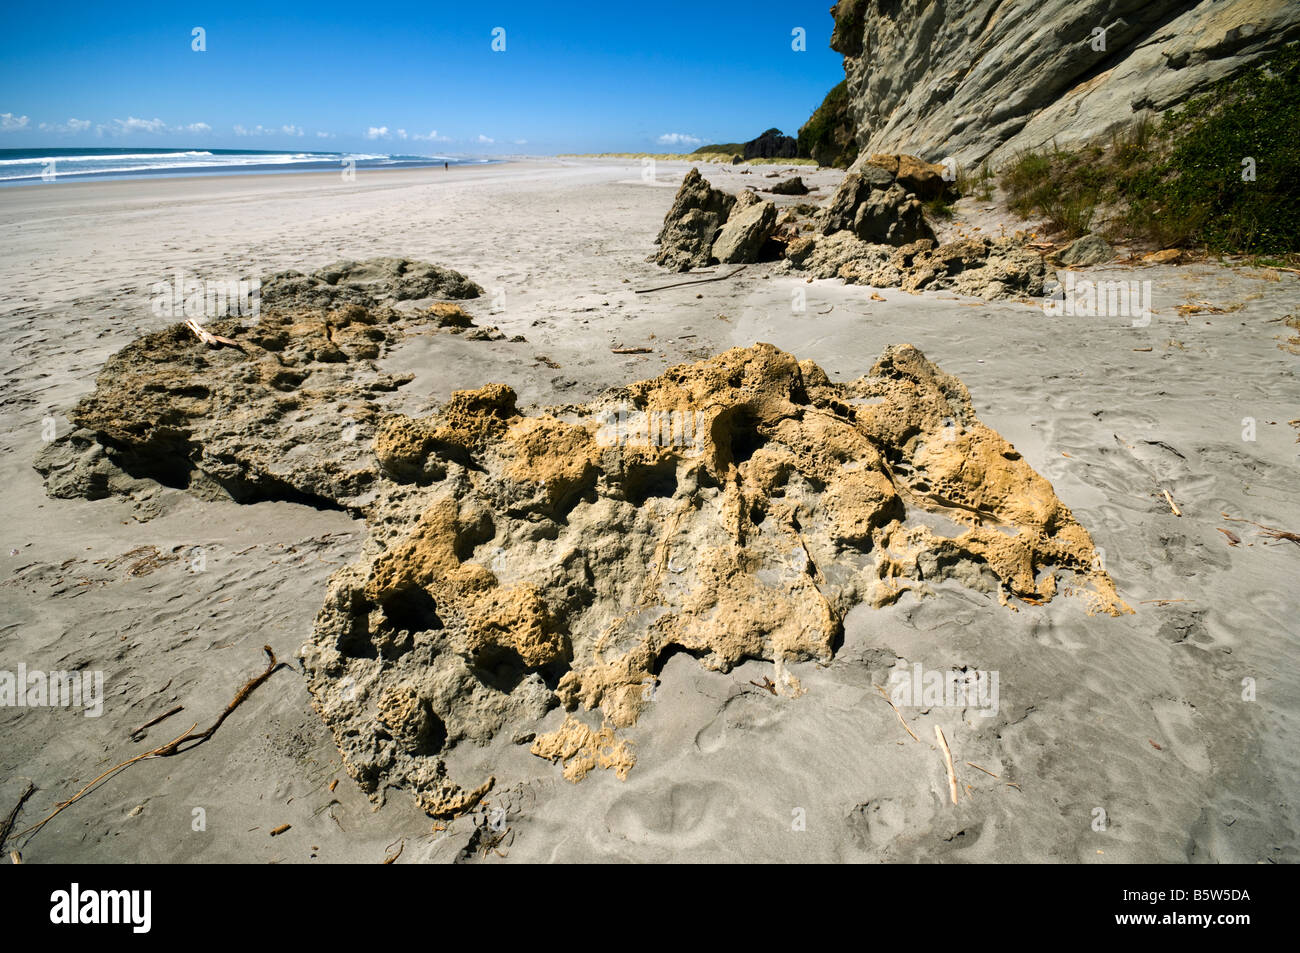 At Fossil Point, near Cape Farewell, South Island, New Zealand Stock Photo  - Alamy